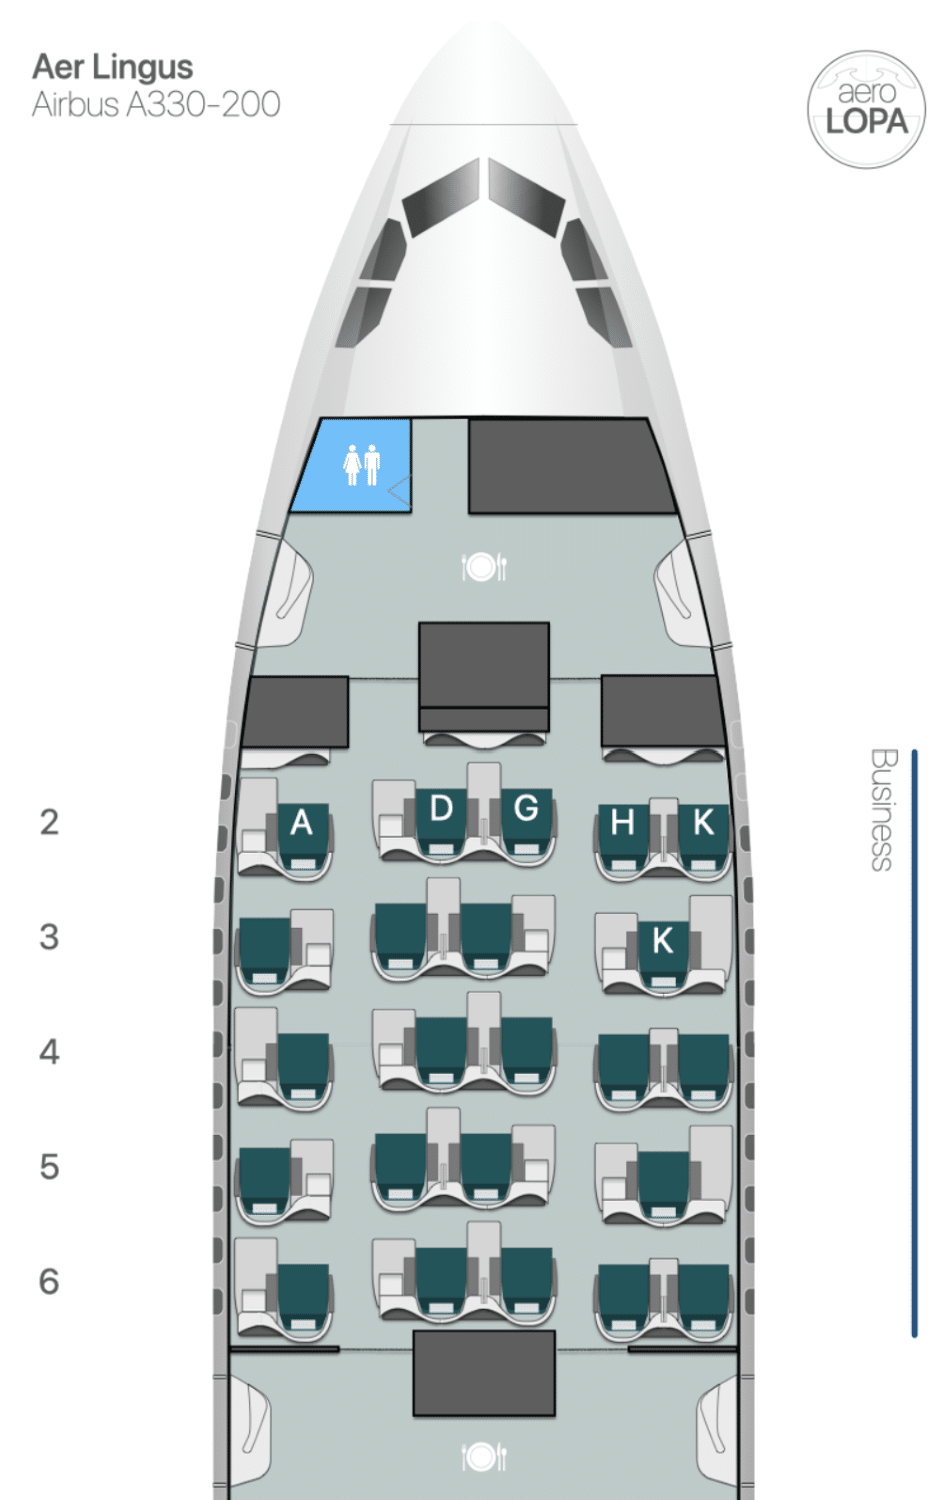 Cabin arrangement for Aer Lingus business class on the Airbus A330-200